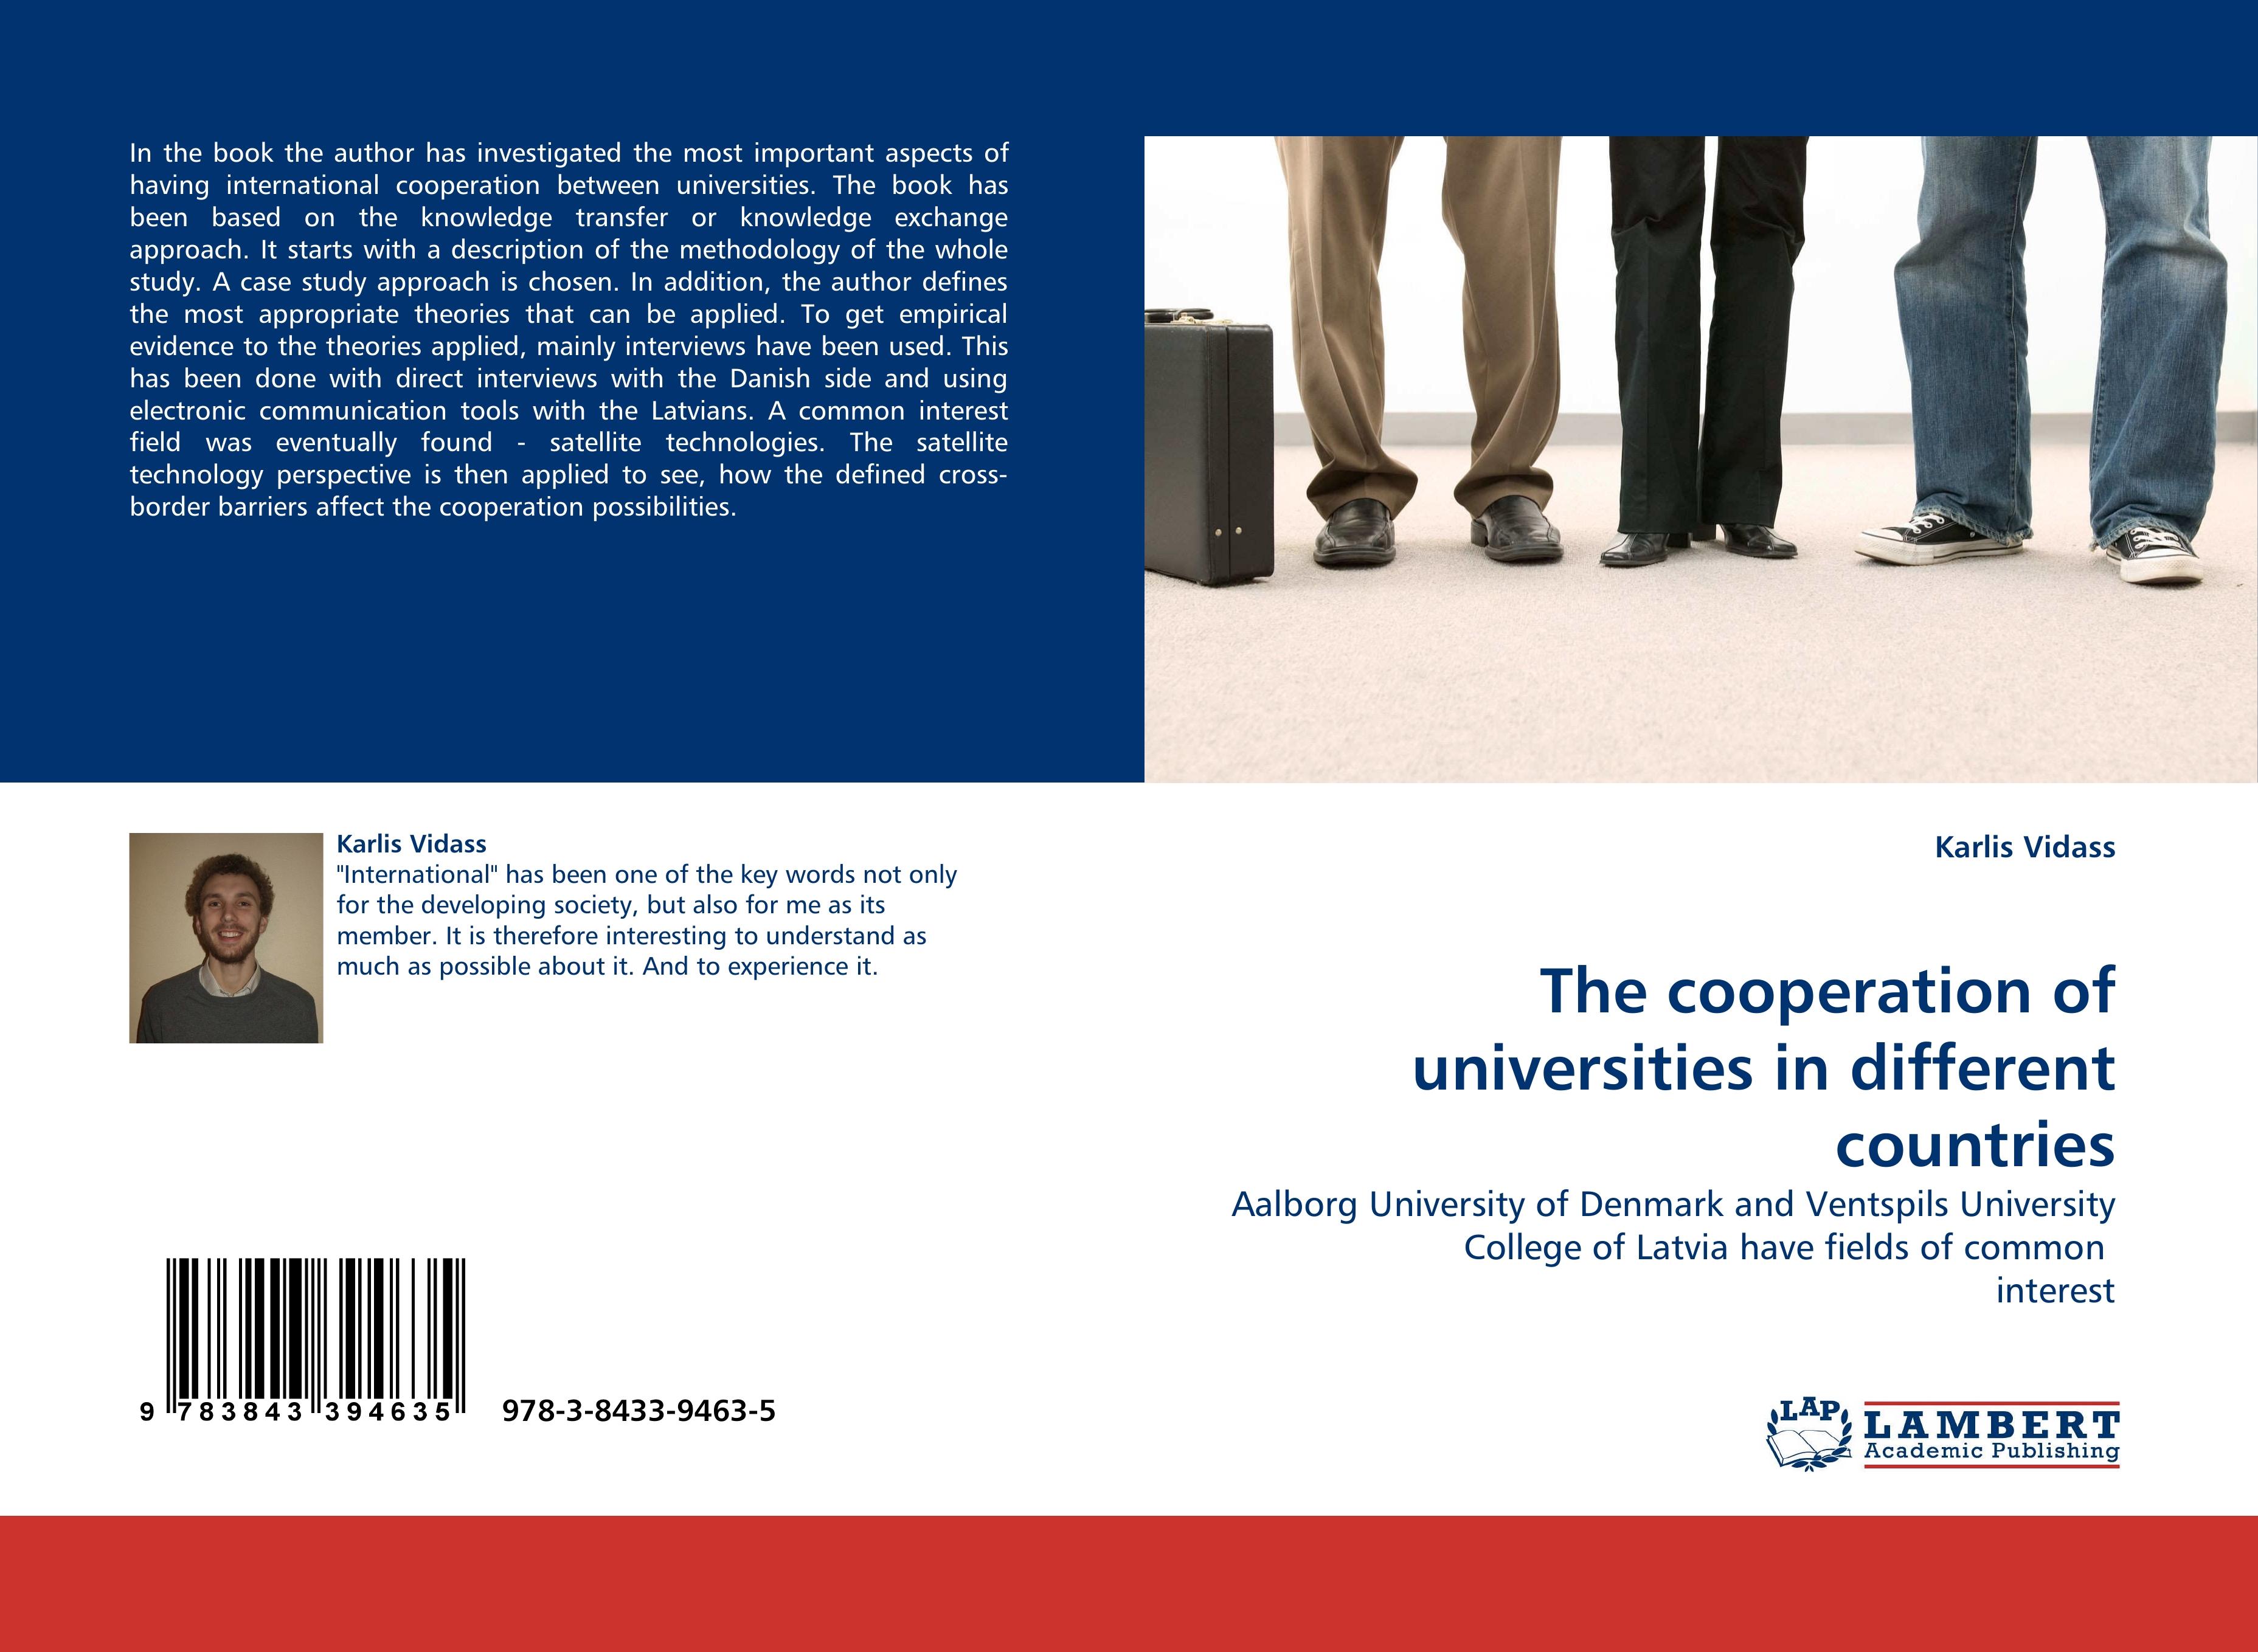 The cooperation of universities in different countries - Vidass, Karlis